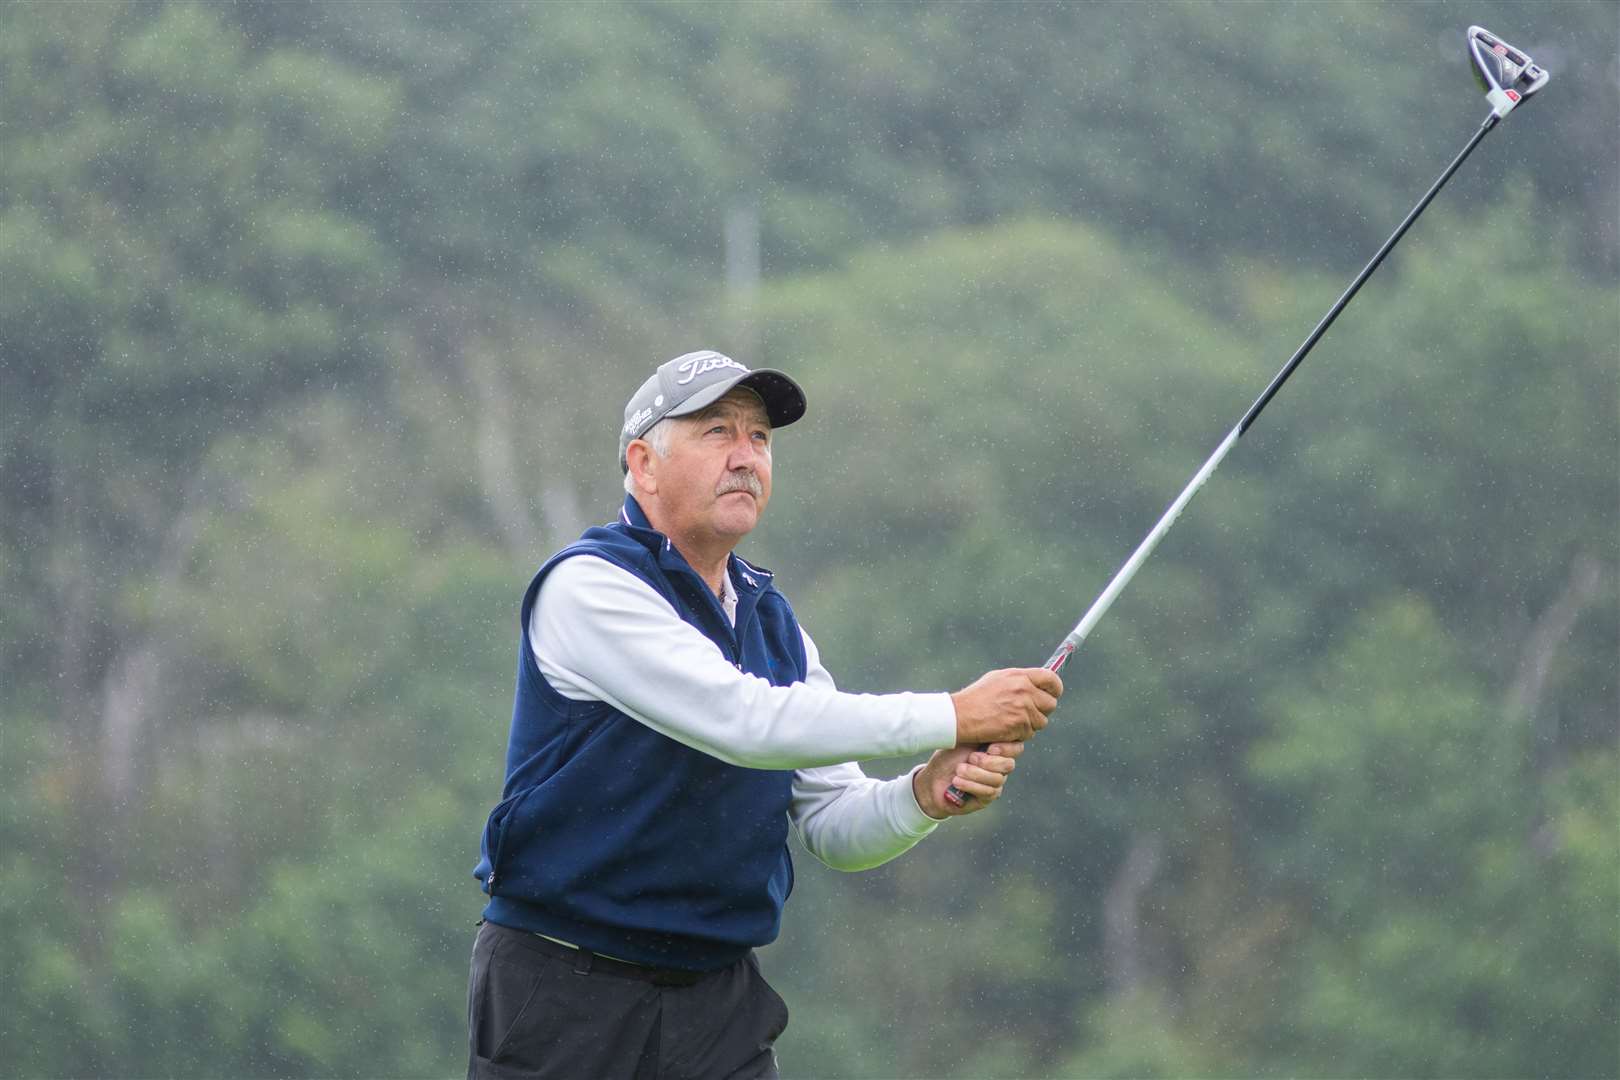 Jim Barber came safely through the first two rounds of the section 1 handicap matchplay. Picture: Daniel Forsyth.